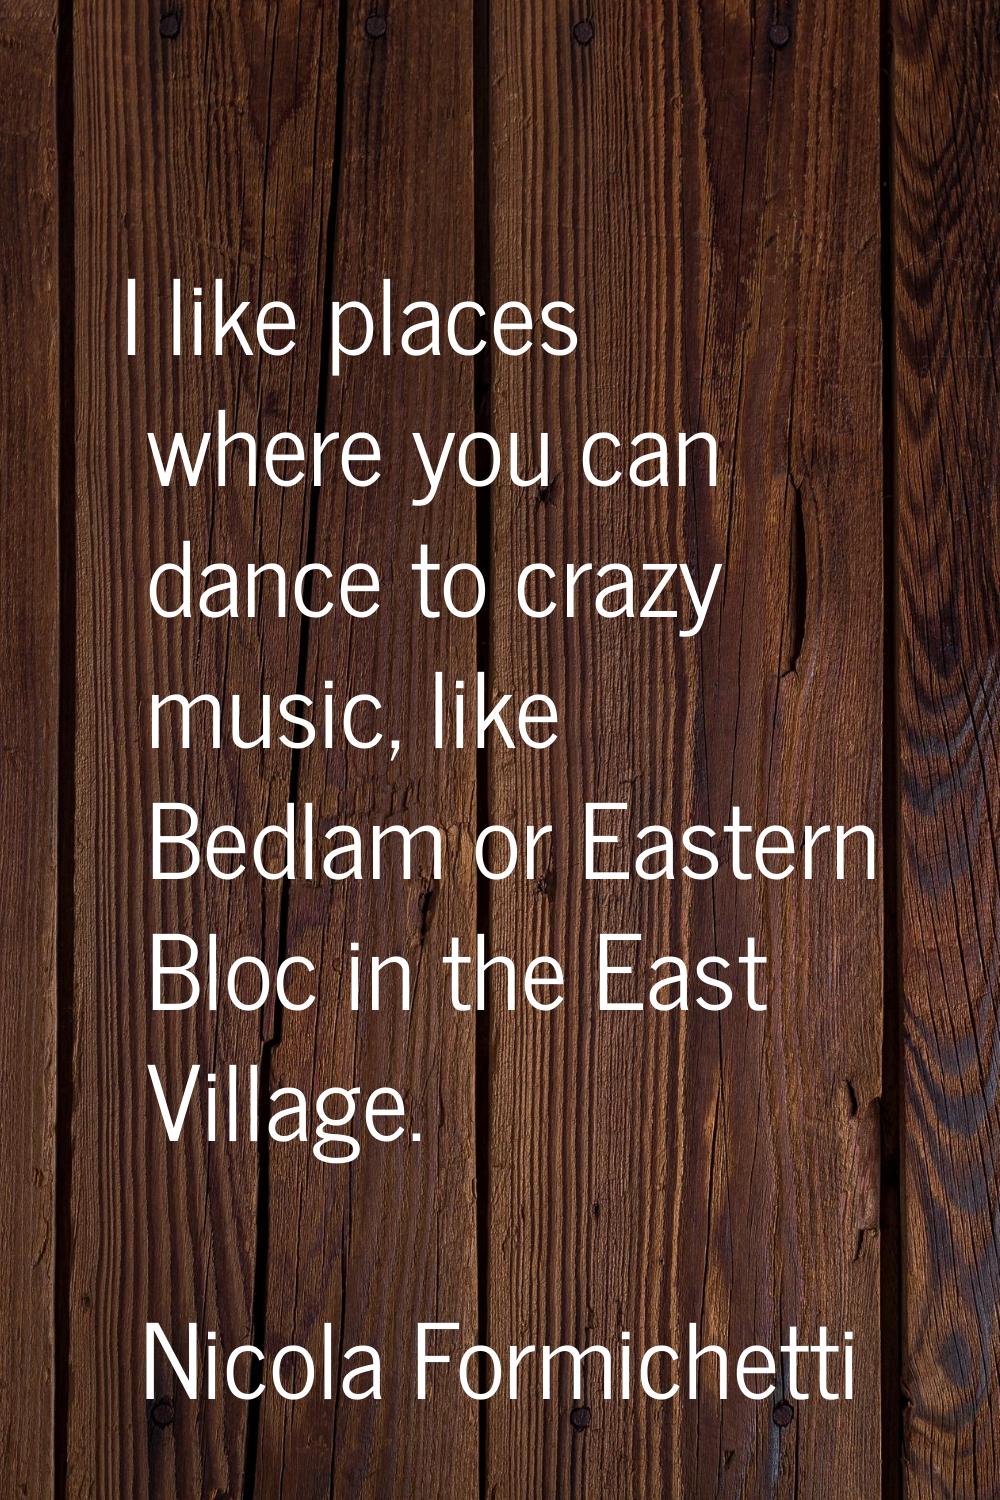 I like places where you can dance to crazy music, like Bedlam or Eastern Bloc in the East Village.